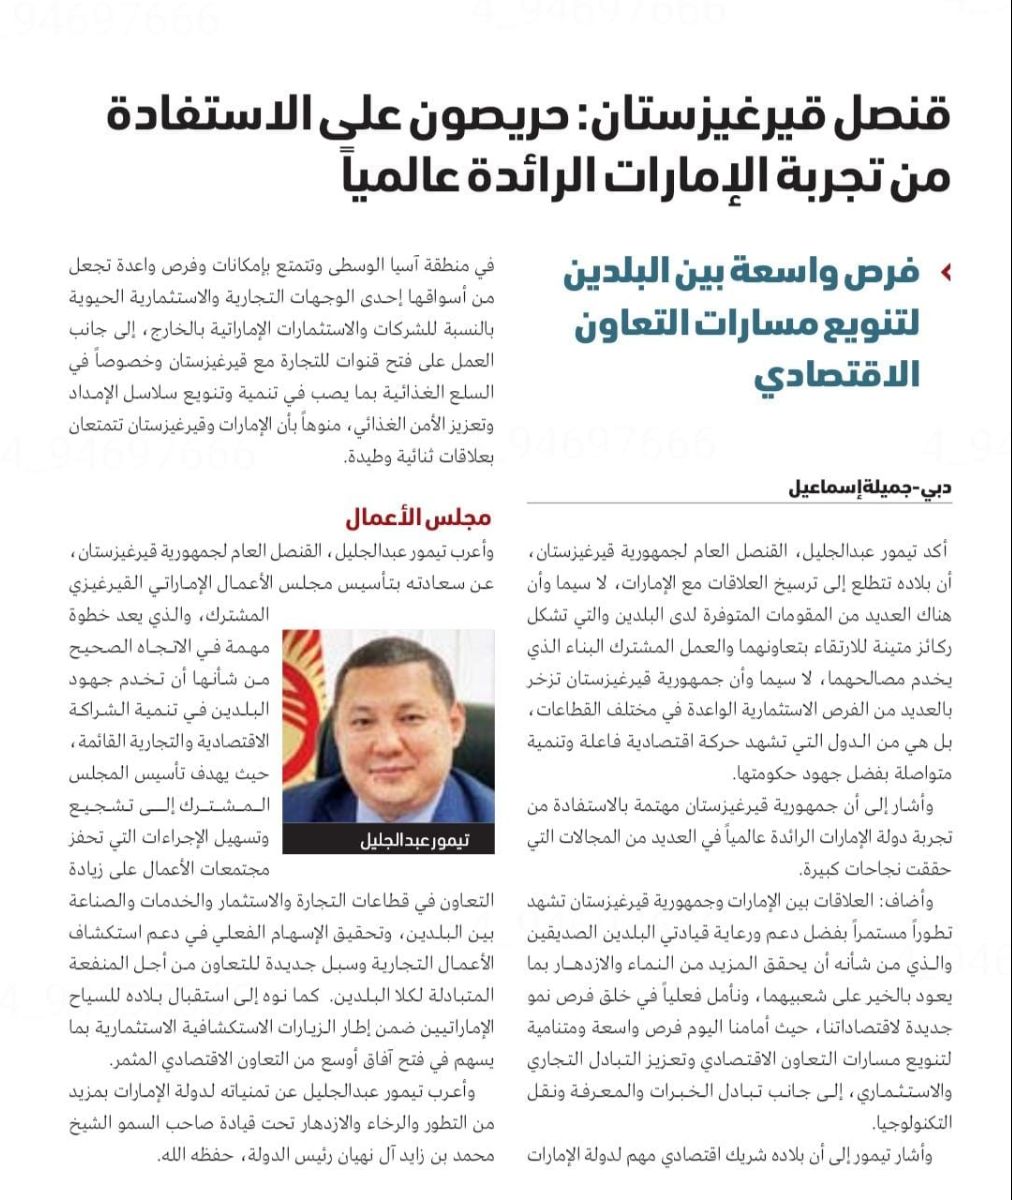 Information article by the Consul General of the Kyrgyz Republic in Dubai and the Northern Emirates Timur Abdijalil for the daily state newspaper 